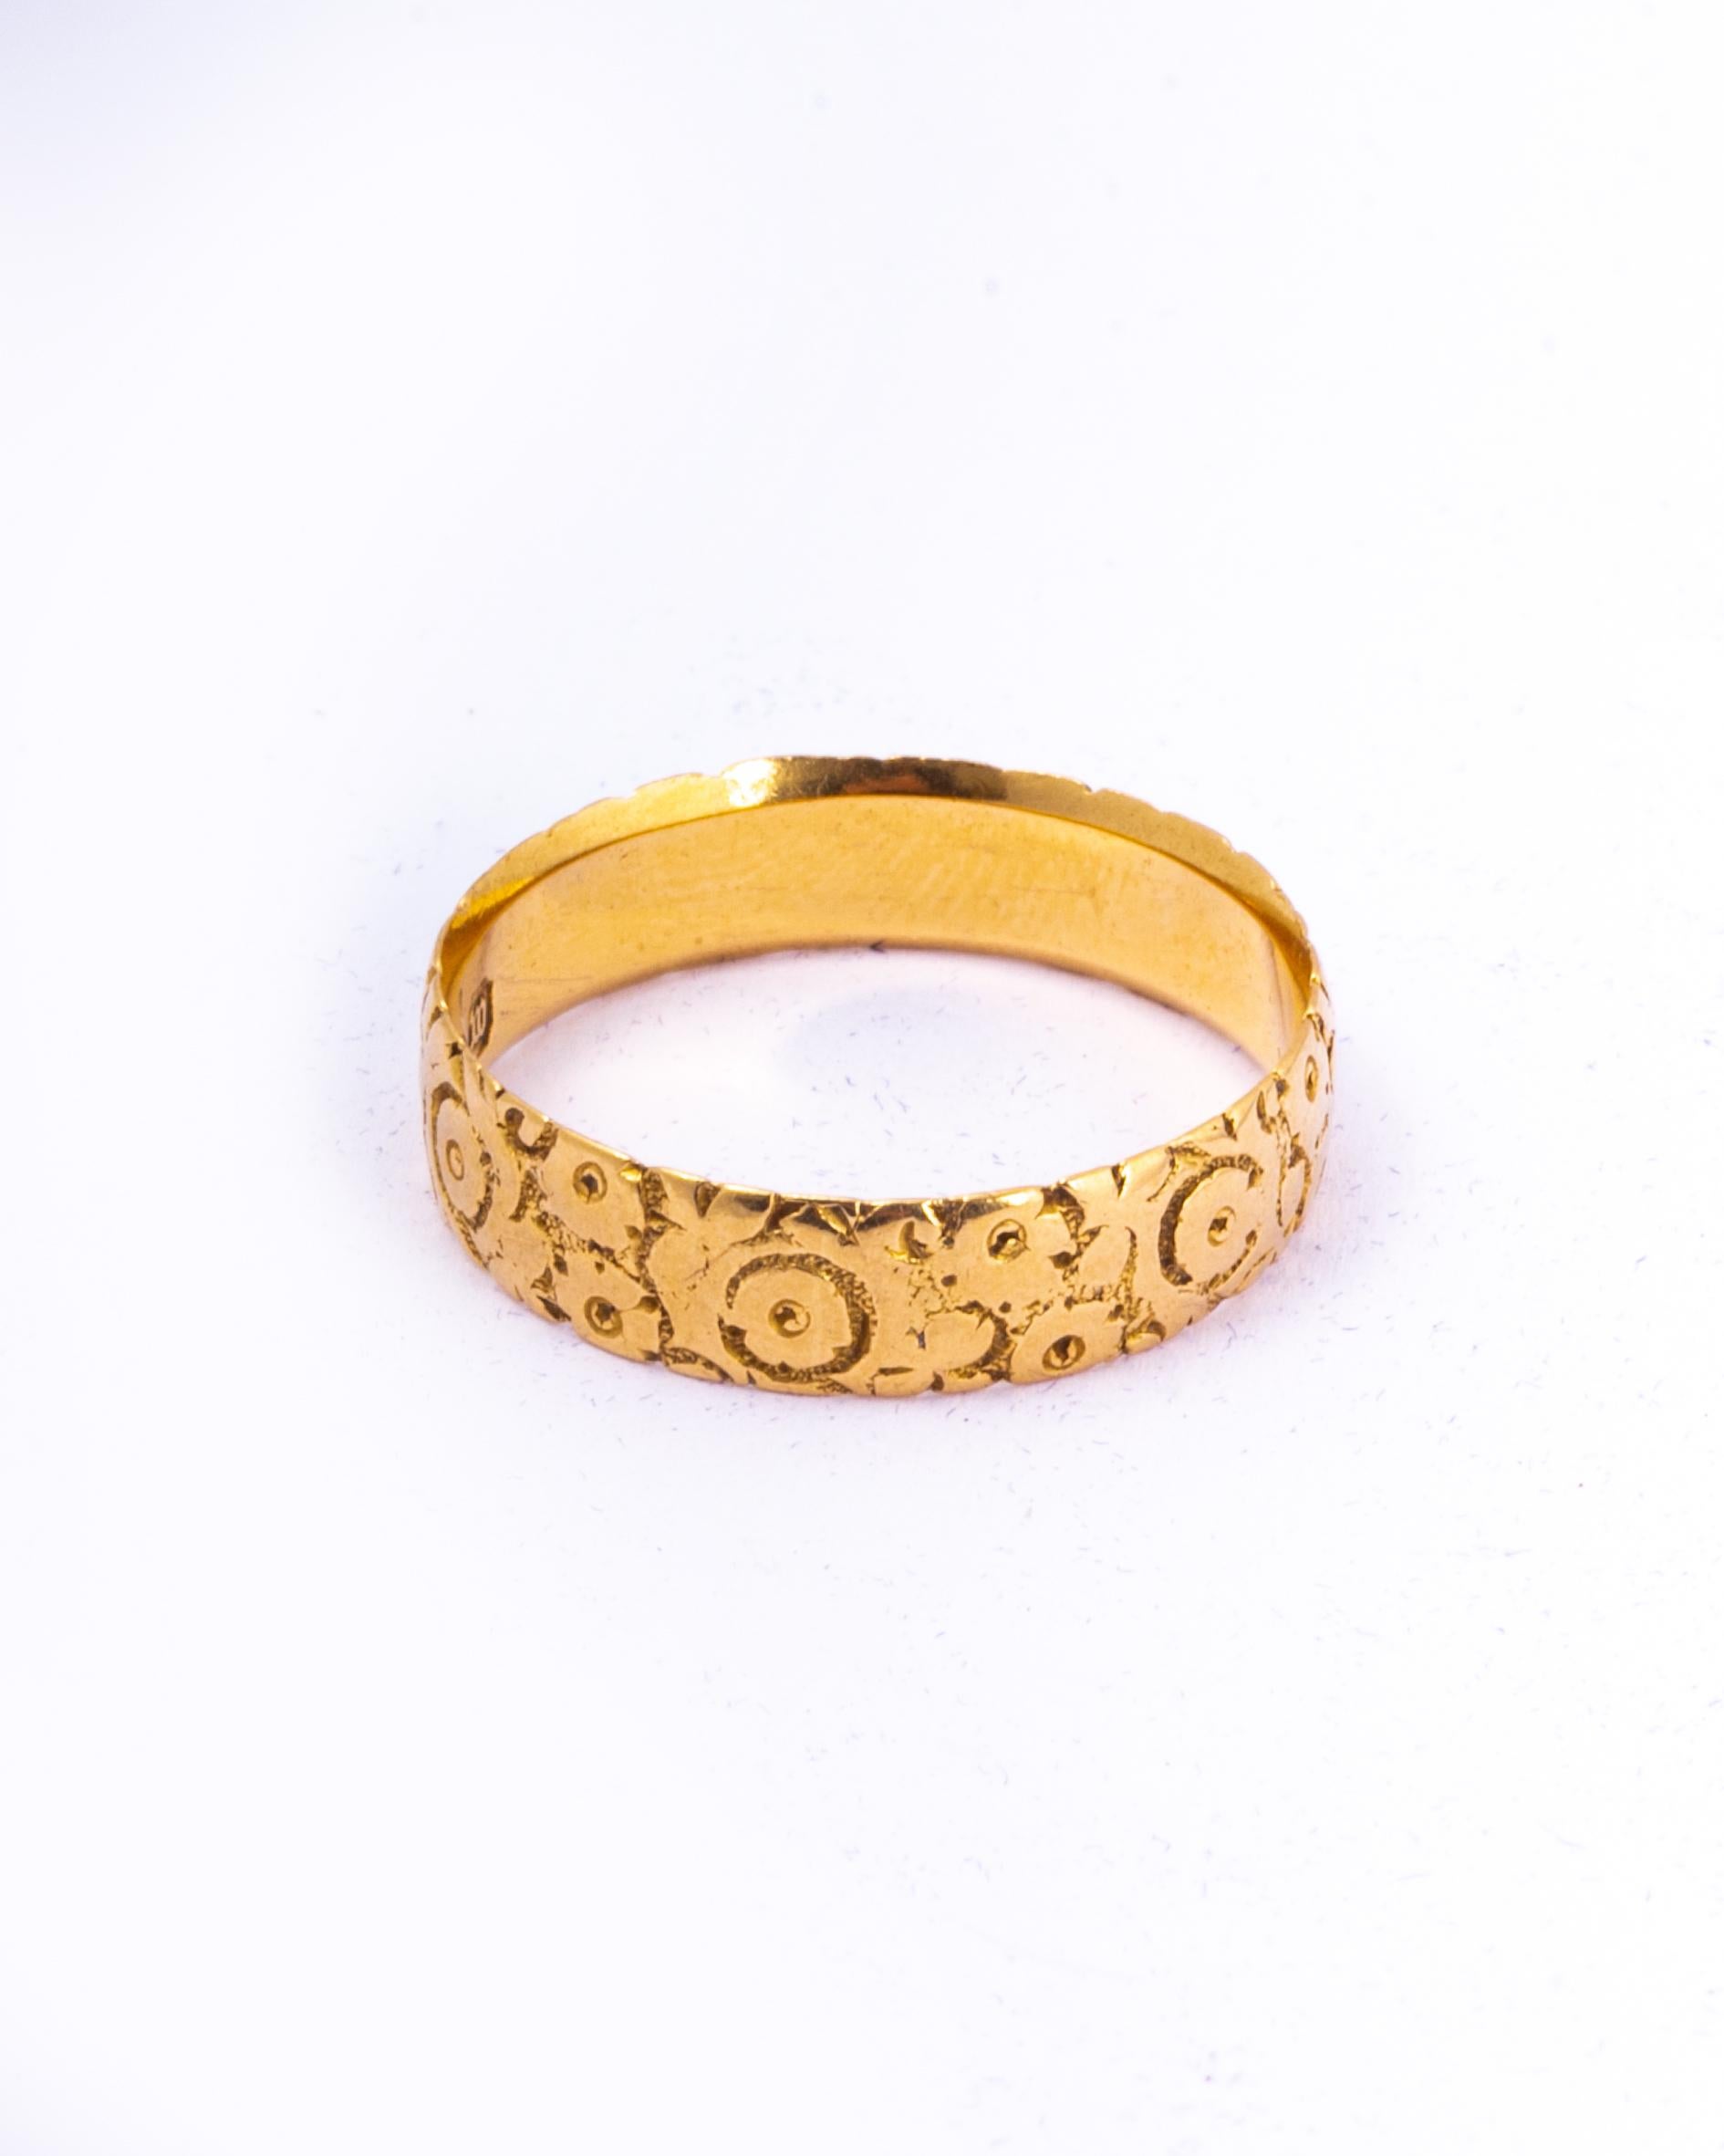 This beautifully decorative 18ct gold band features stunning floral style engraving. 

Ring Size: Q 1/4 or 8 1/4 
Band Width: 5mm

Weight: 3.63g